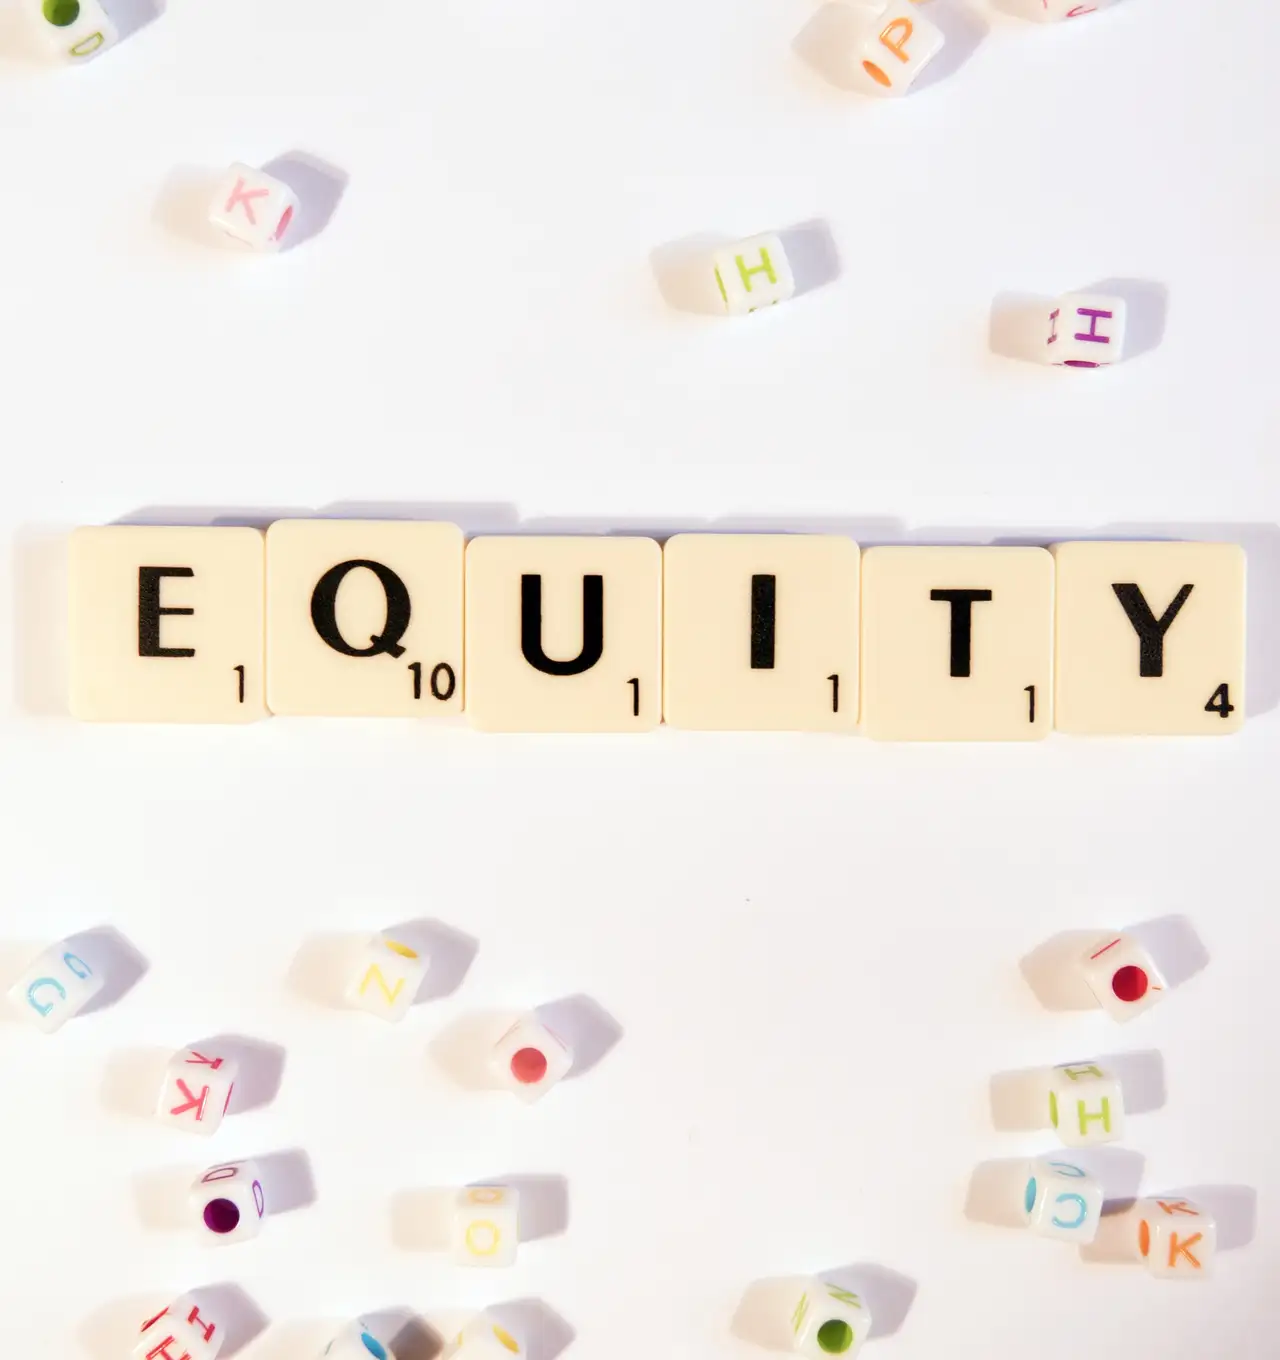 The word "equity" spelt out on Scrabble tiles